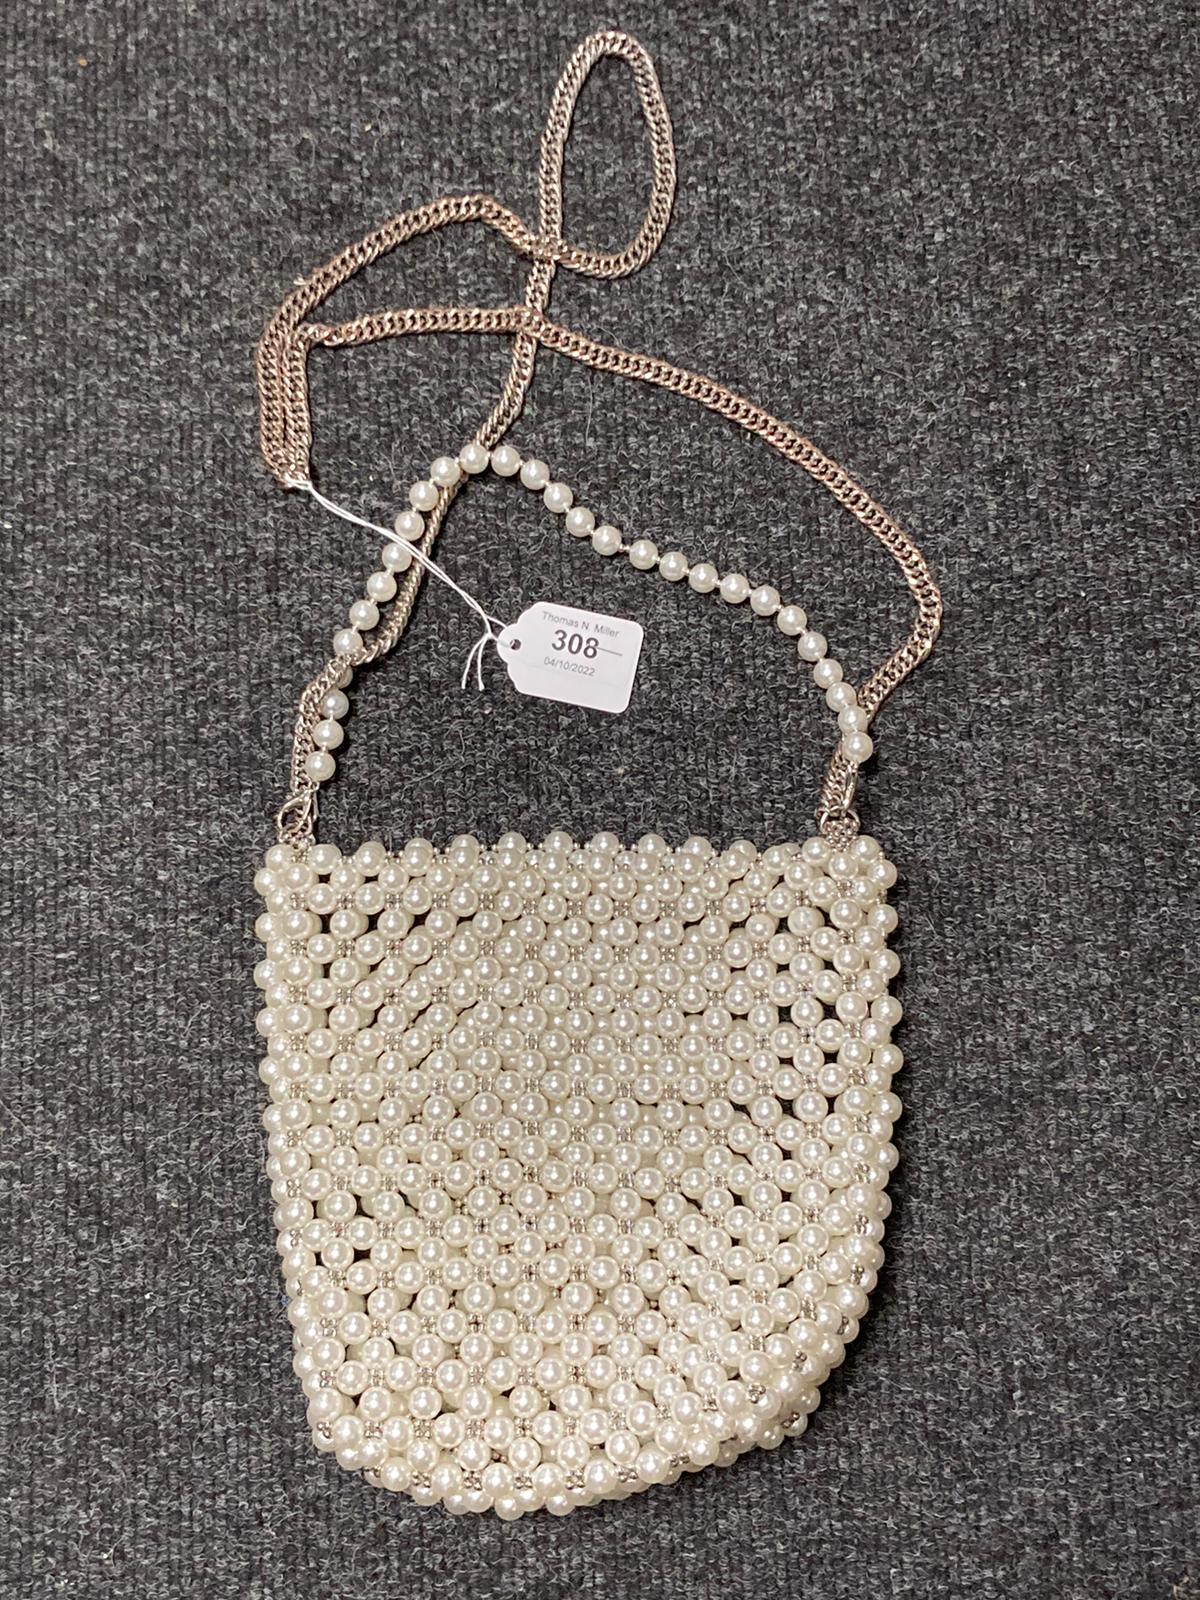 A faux pearl lady's bag on chain